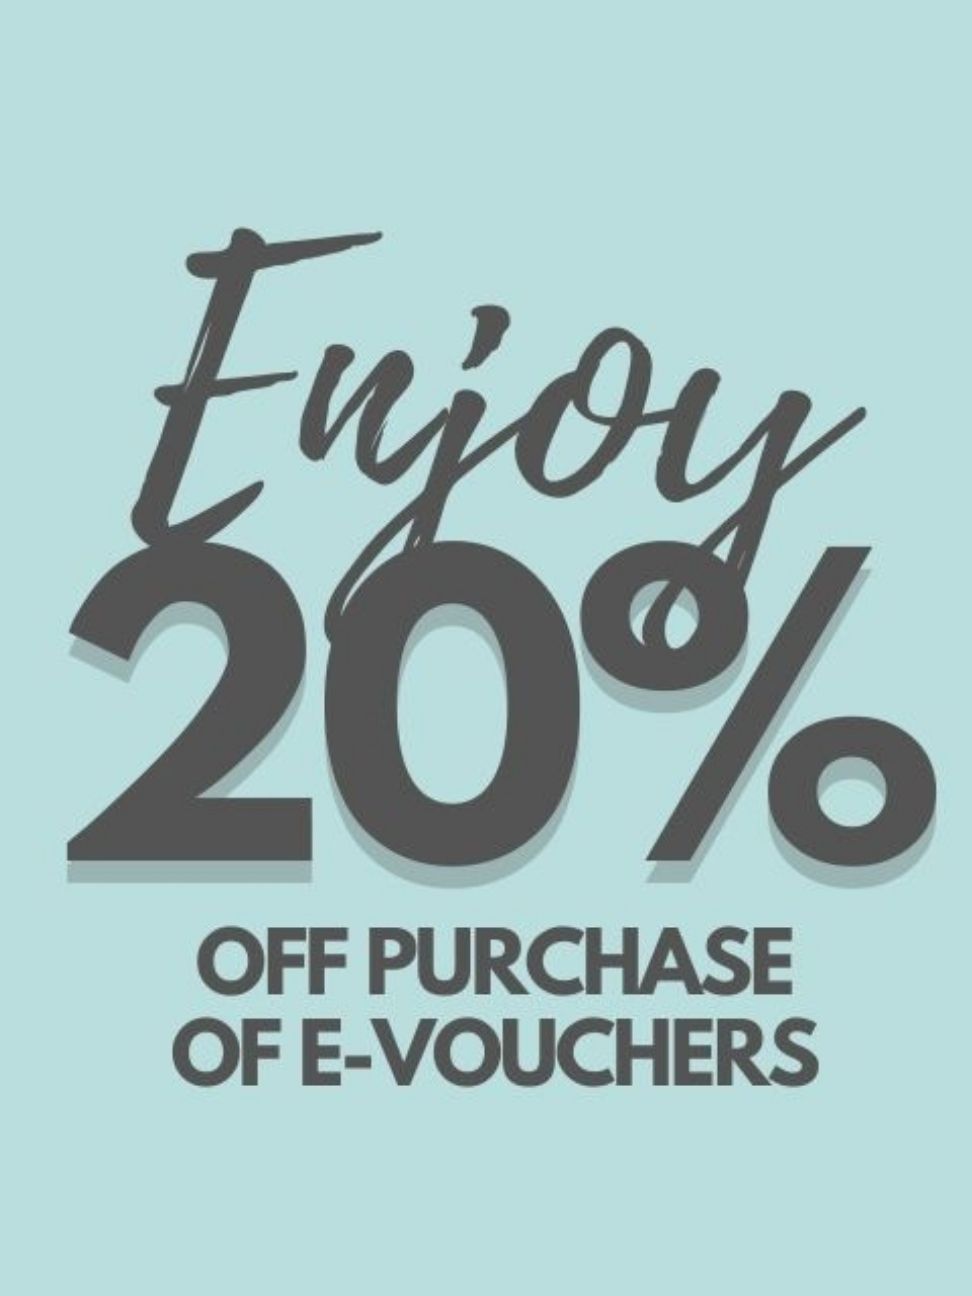 Enjoy 20% off purchase of e-vouchers! (SOLD OUT)